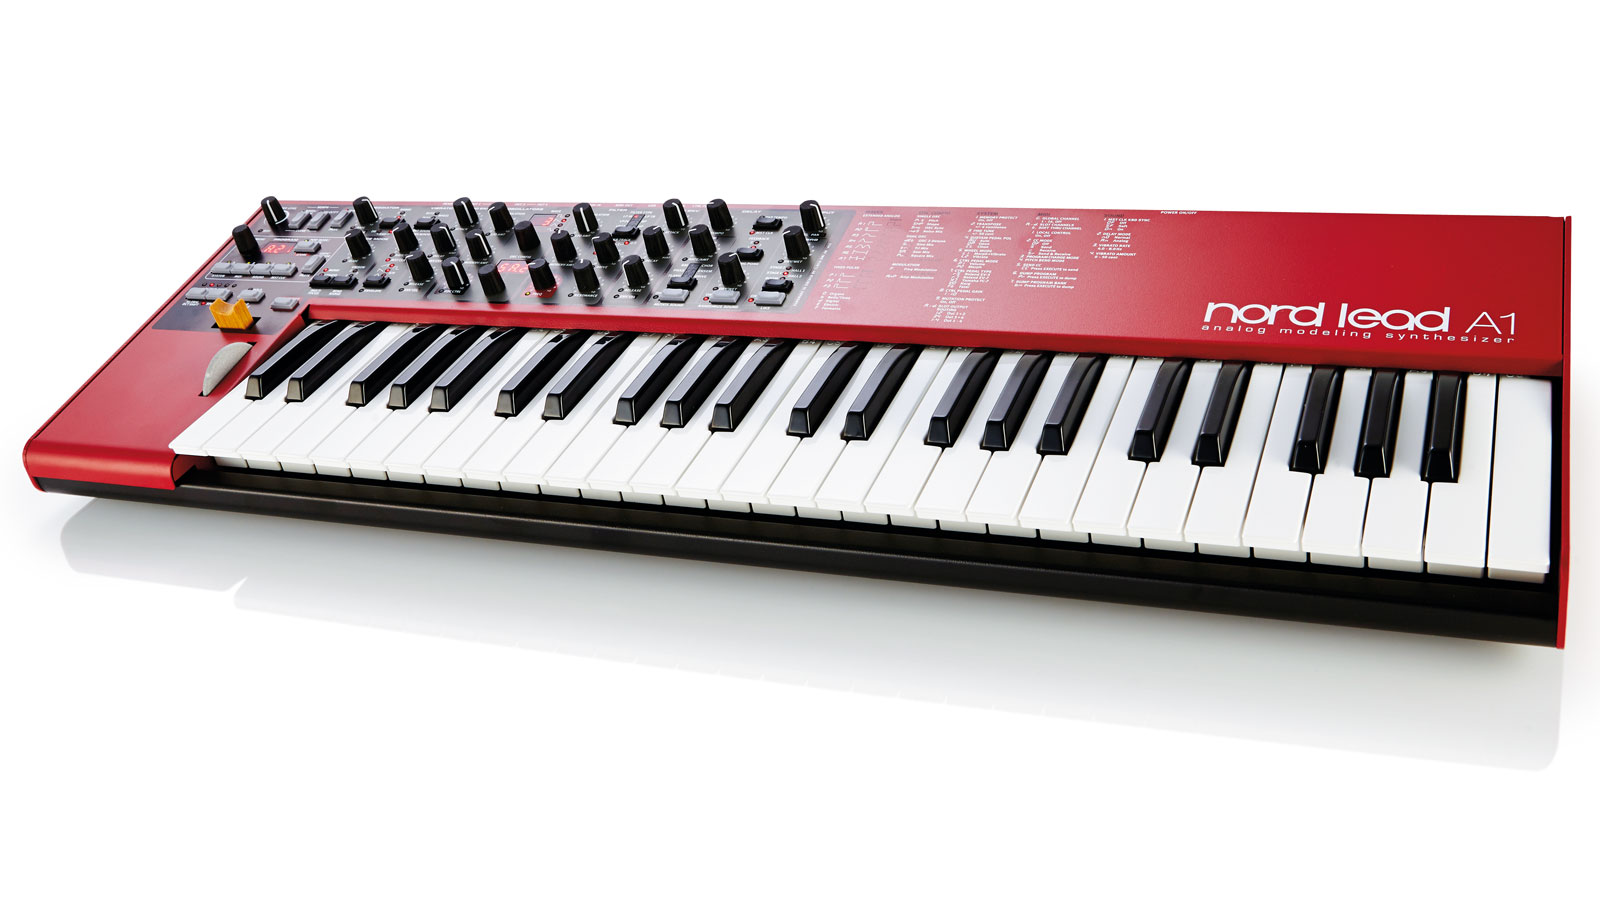 NORD-LEAD-A-1 Nord Lead A1 49-Key Analog Modeling Synthesizer 